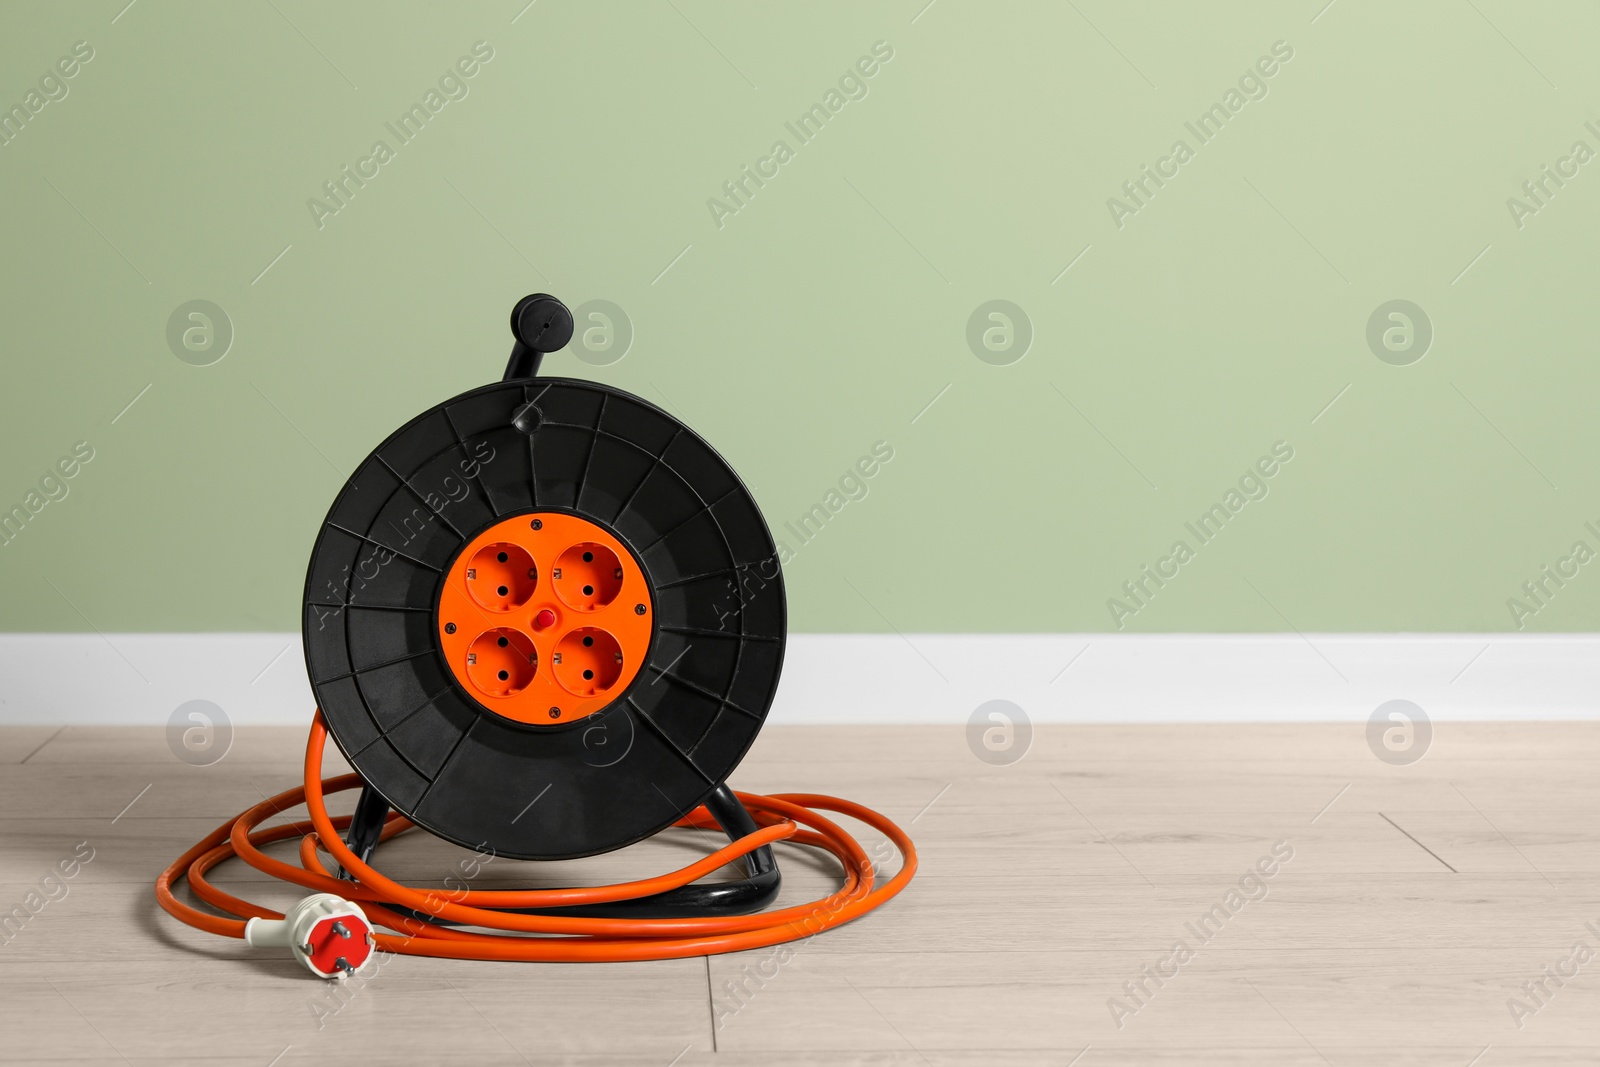 Photo of Extension cord reel on floor near light green wall, space for text. Electrician's equipment